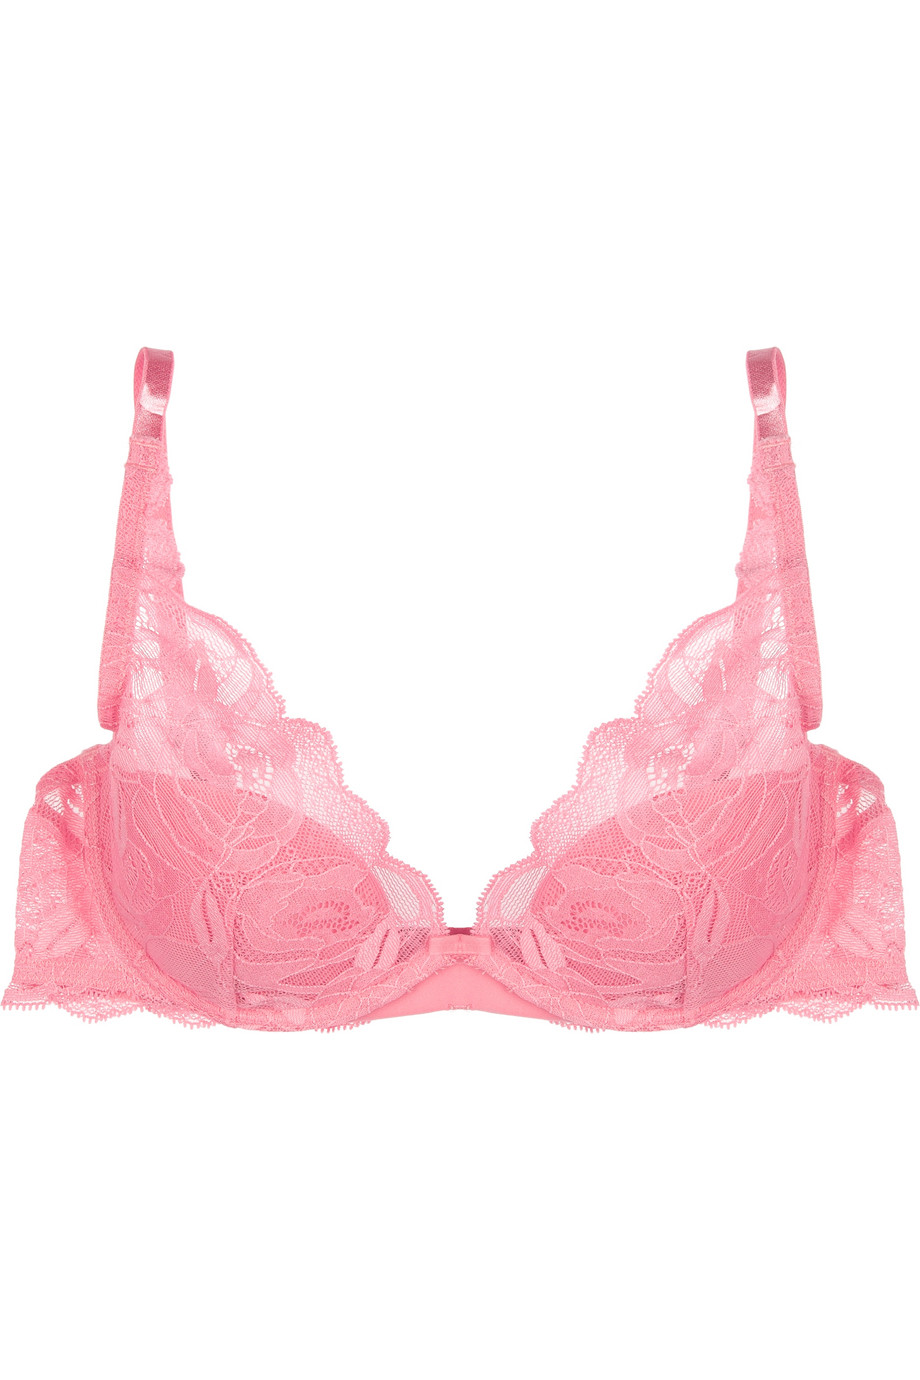 Calvin Klein Perfectly Fit Stretch-Lace Underwired Plunge Bra in Pink ...